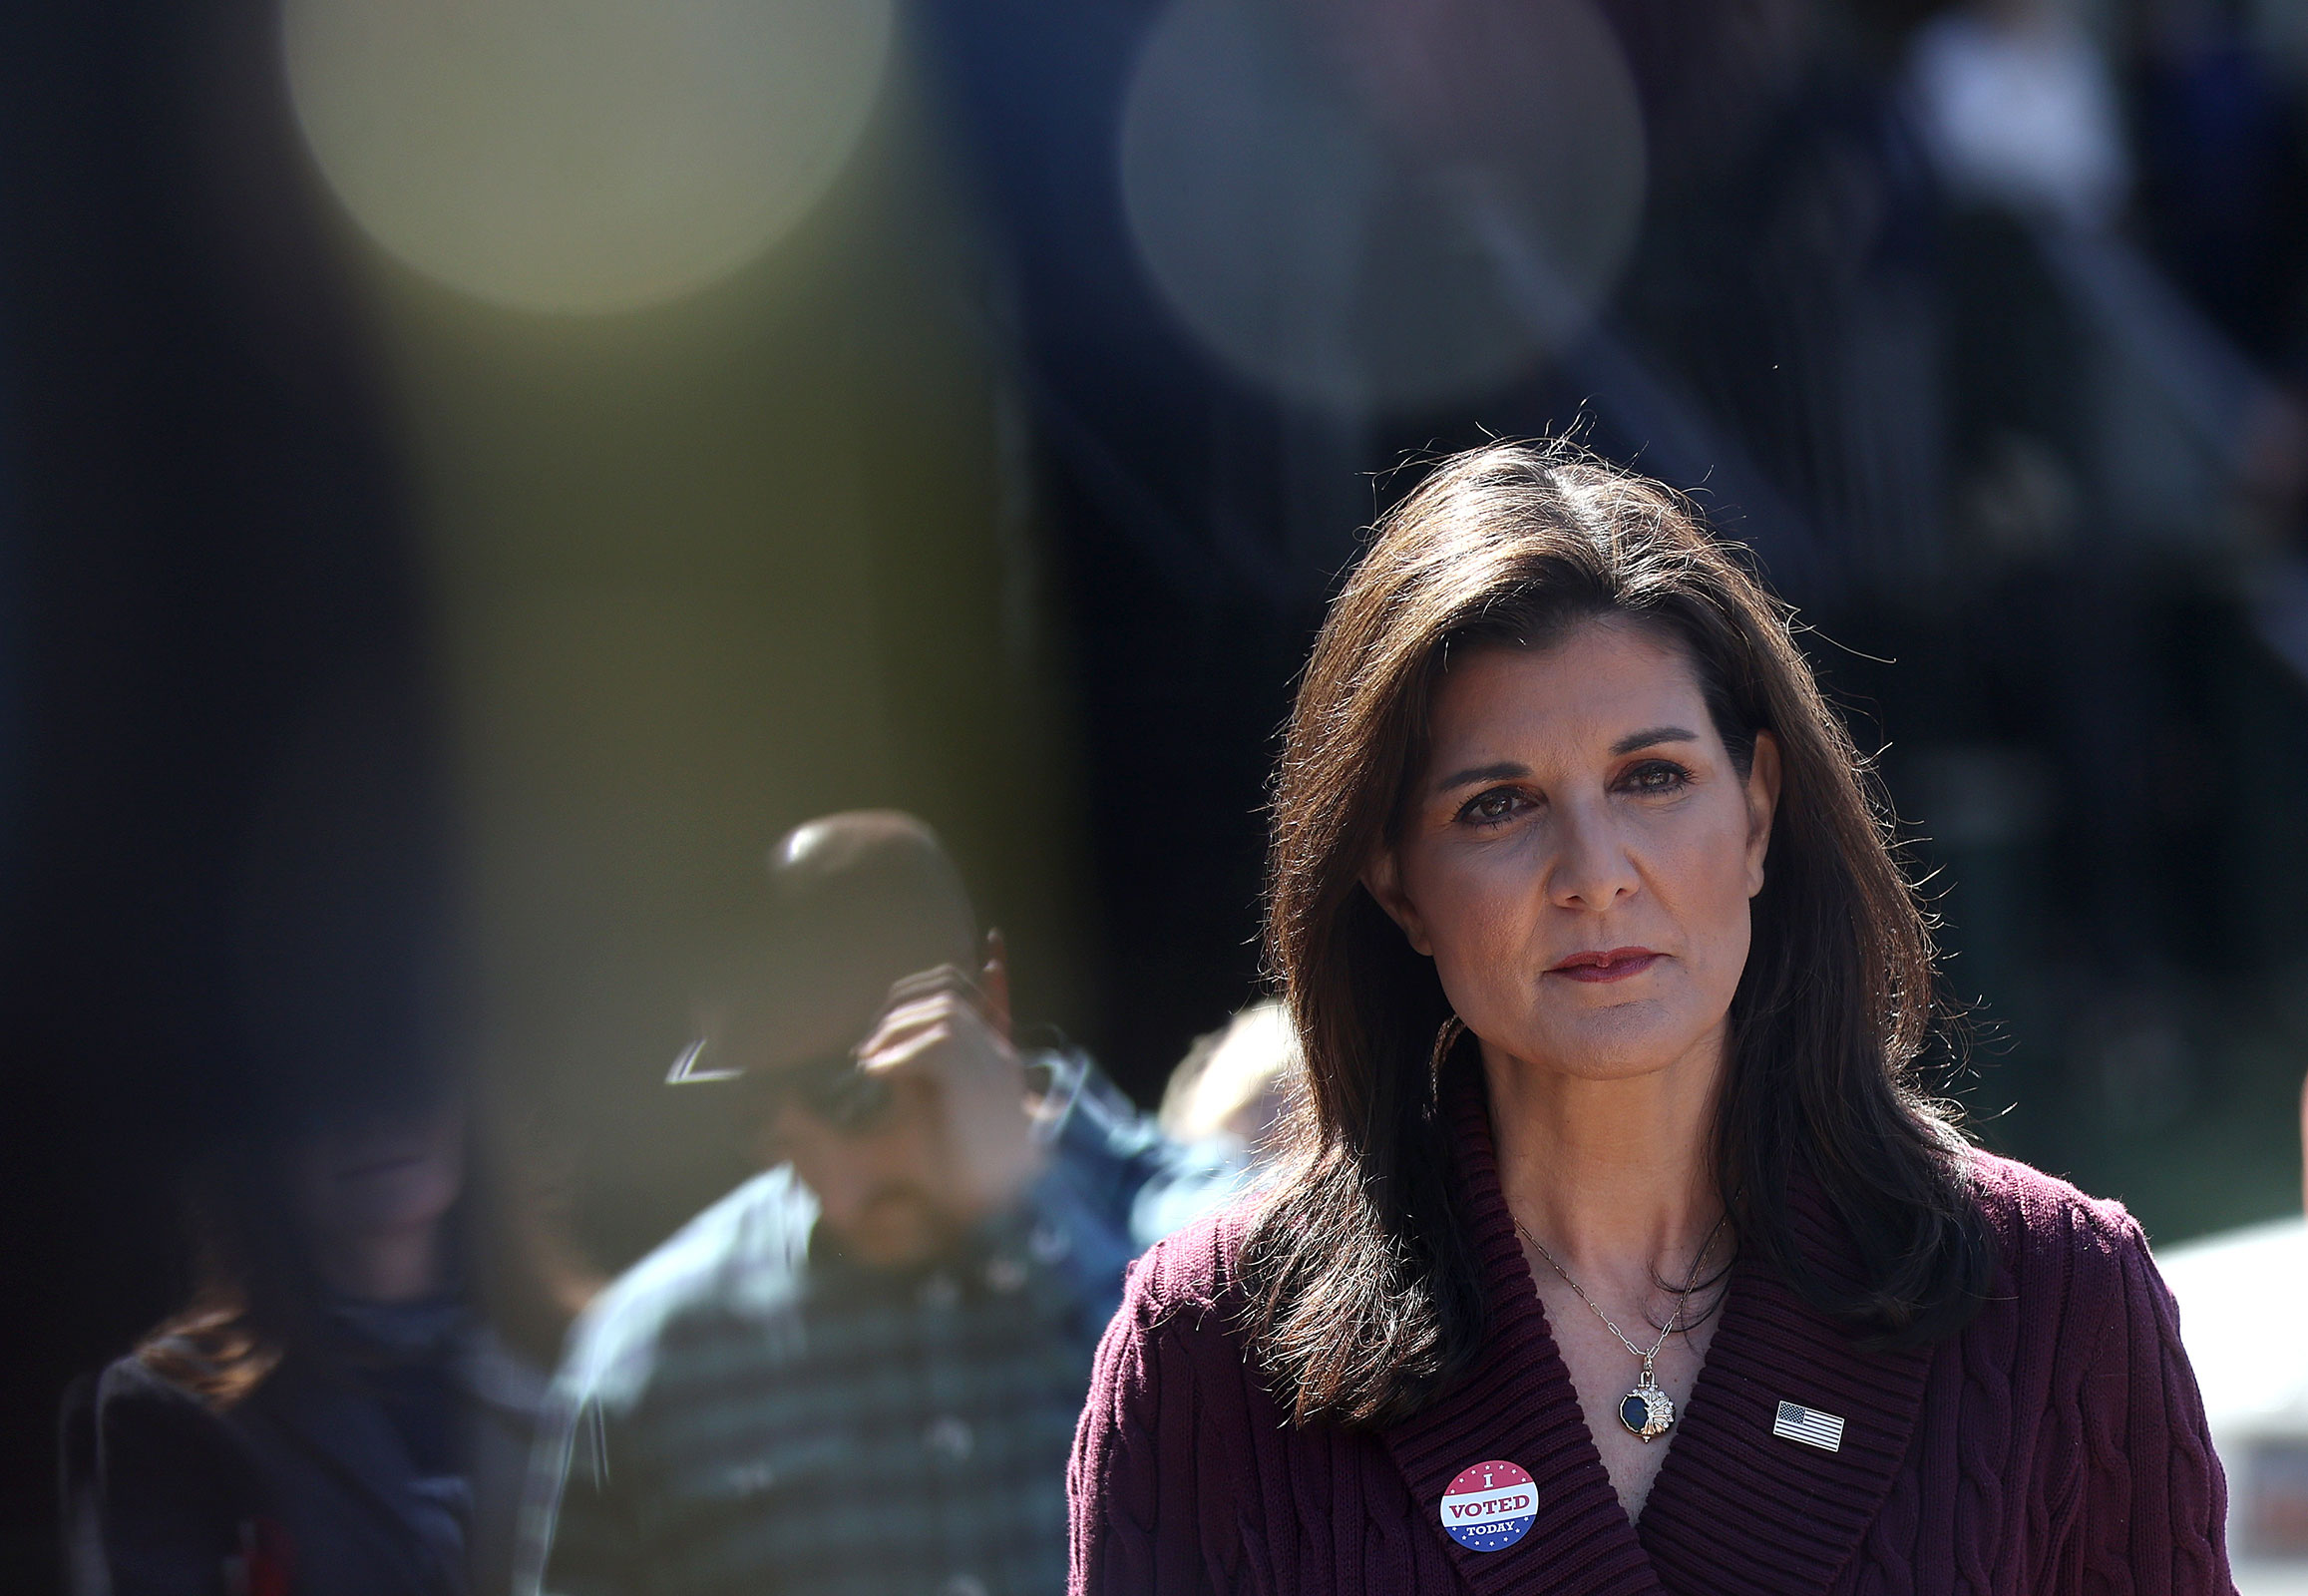 Nikki Haley speaks to reporters after voting in the South Carolina Republican primary on February 24, in Kiawah Island, South Carolina.